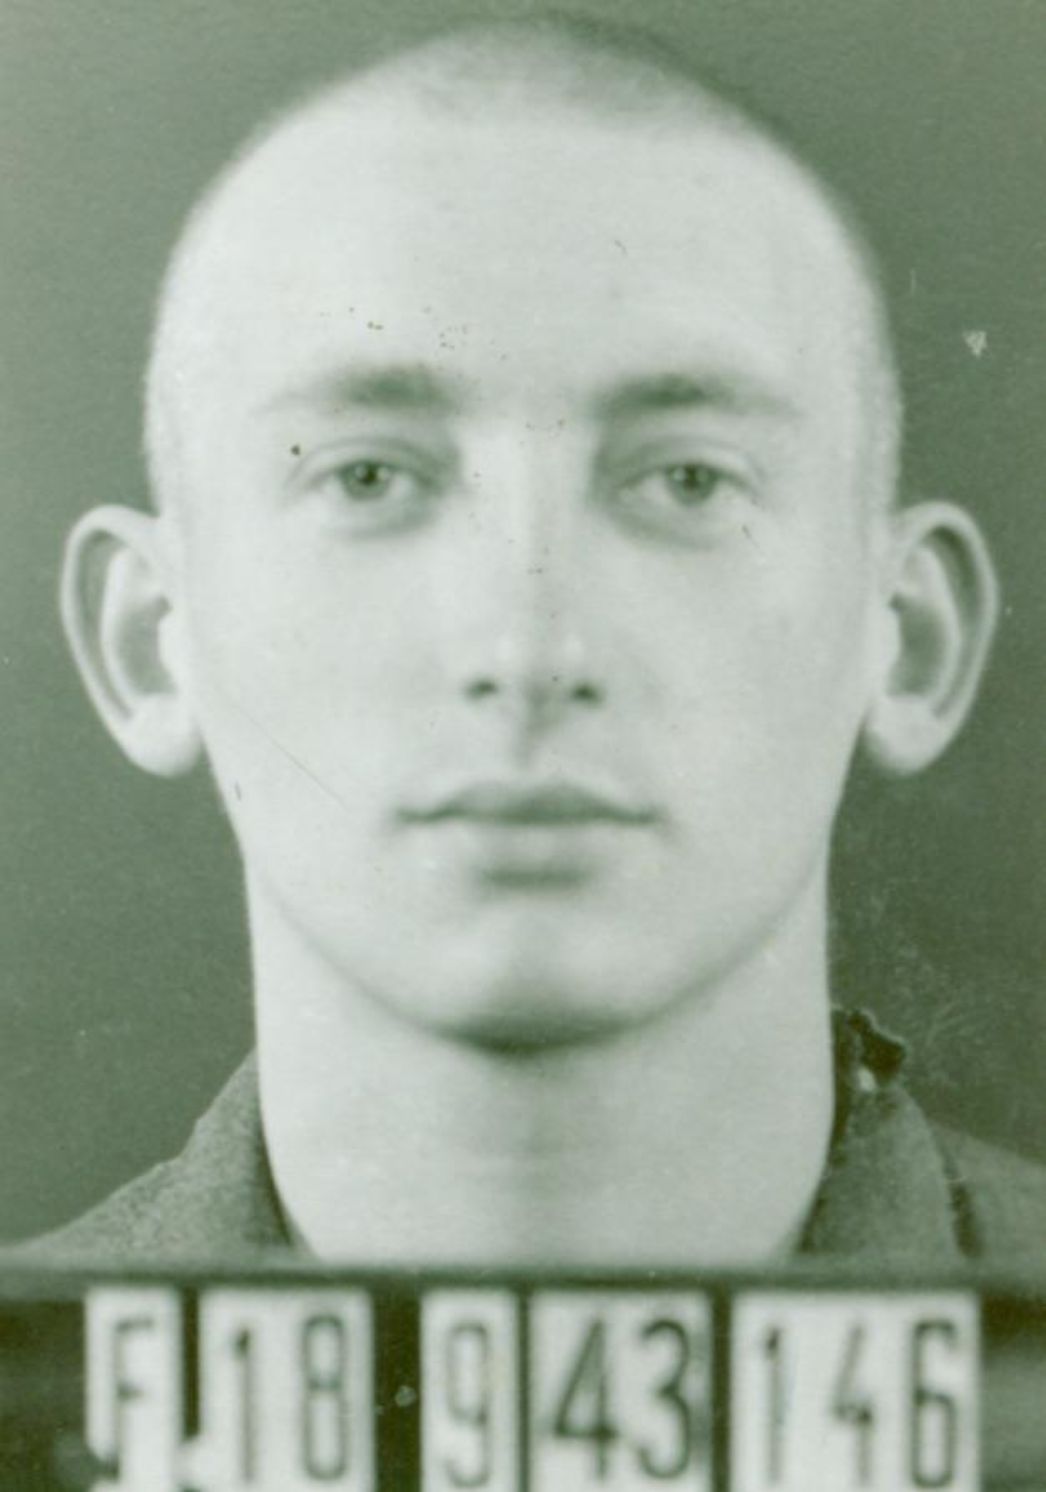 Identification service photo of Yves-Pierre Boulogne